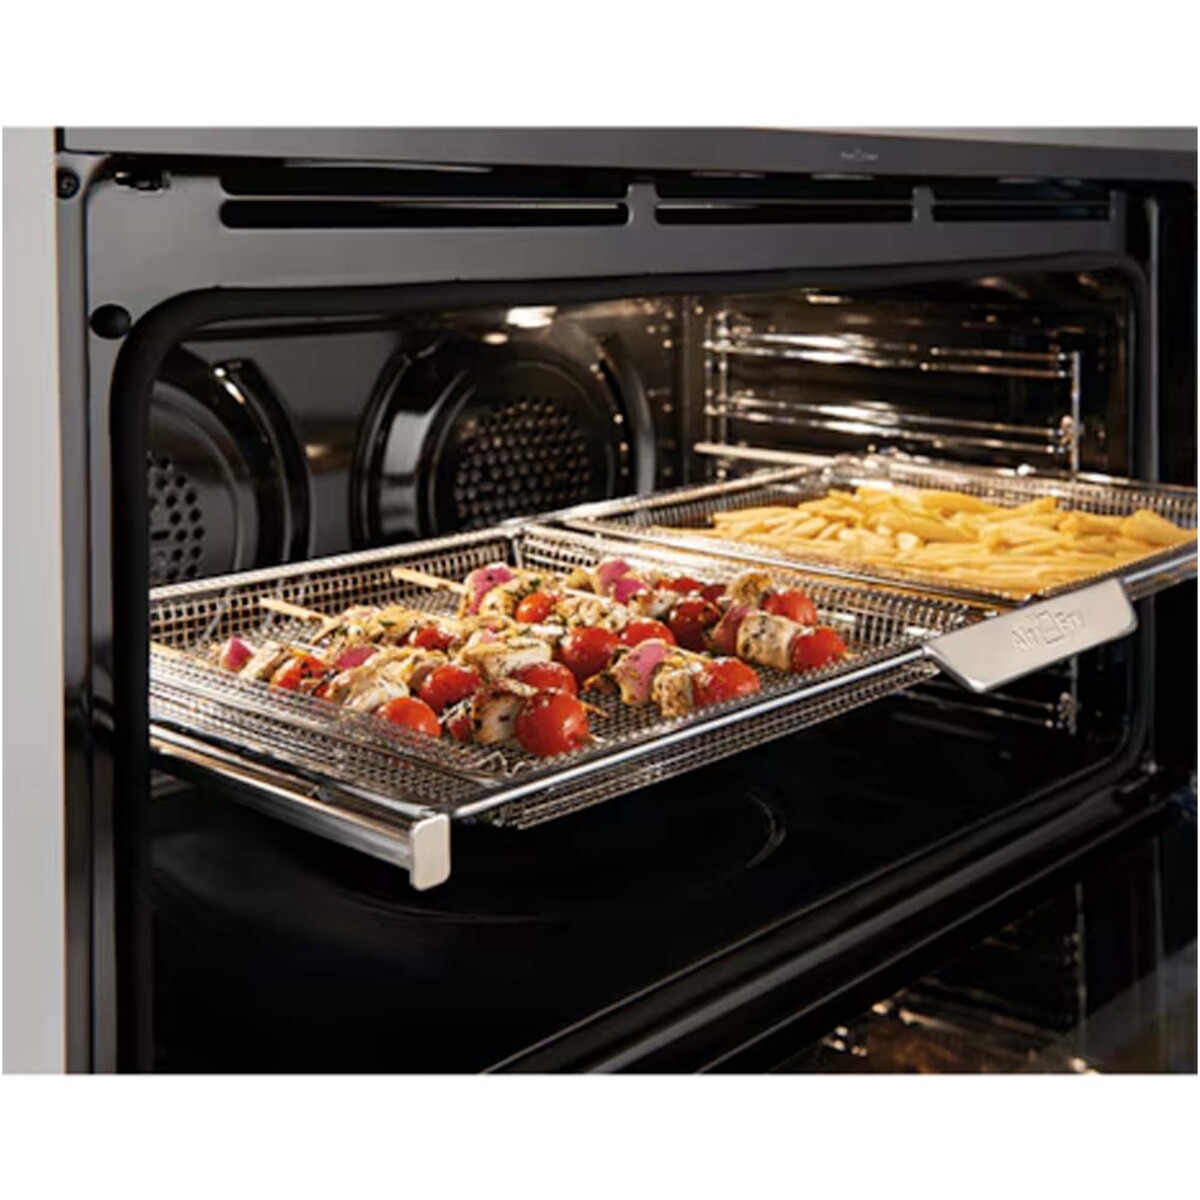 Frigidaire Built-In Electric Oven, 3600W, 125 L, FRVEP916SC